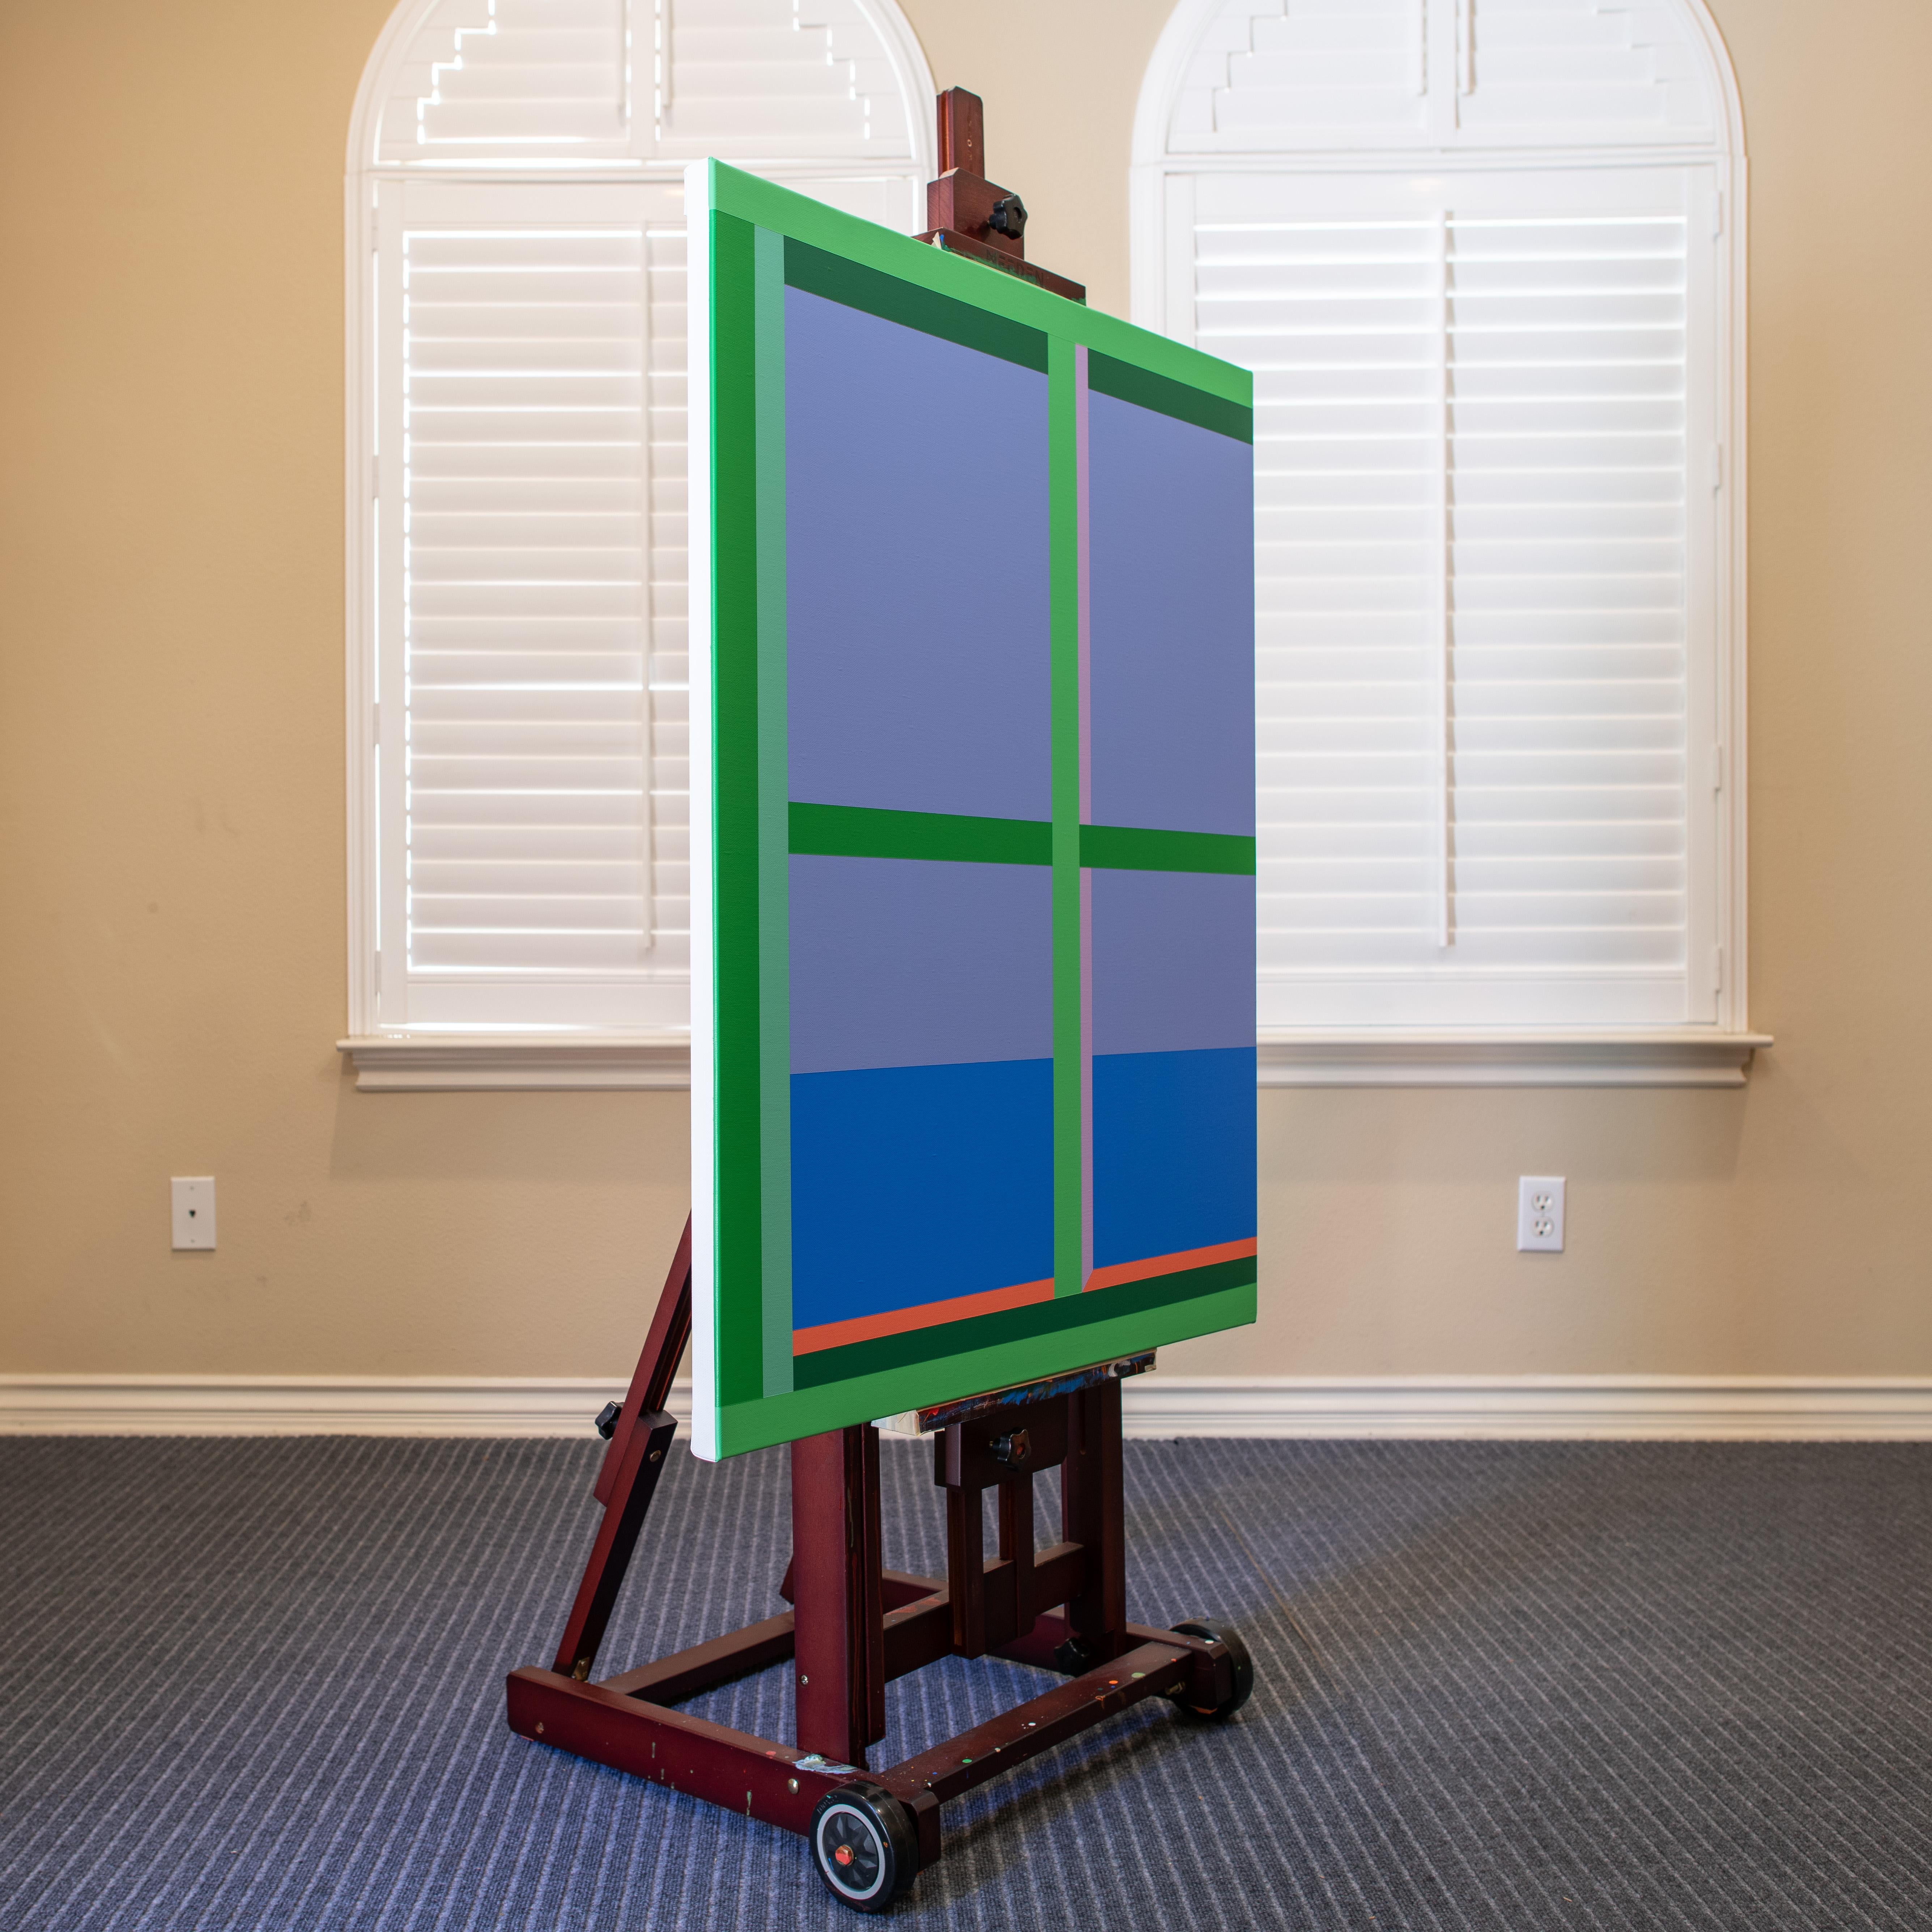 <p>Artist Comments<br>A green window reveals a serene horizon of blue and lavender hues. The arrangement of shapes and colors creates a dynamic play of light and shadow. Its abstract yet purposeful composition brings a sense of calm and order,